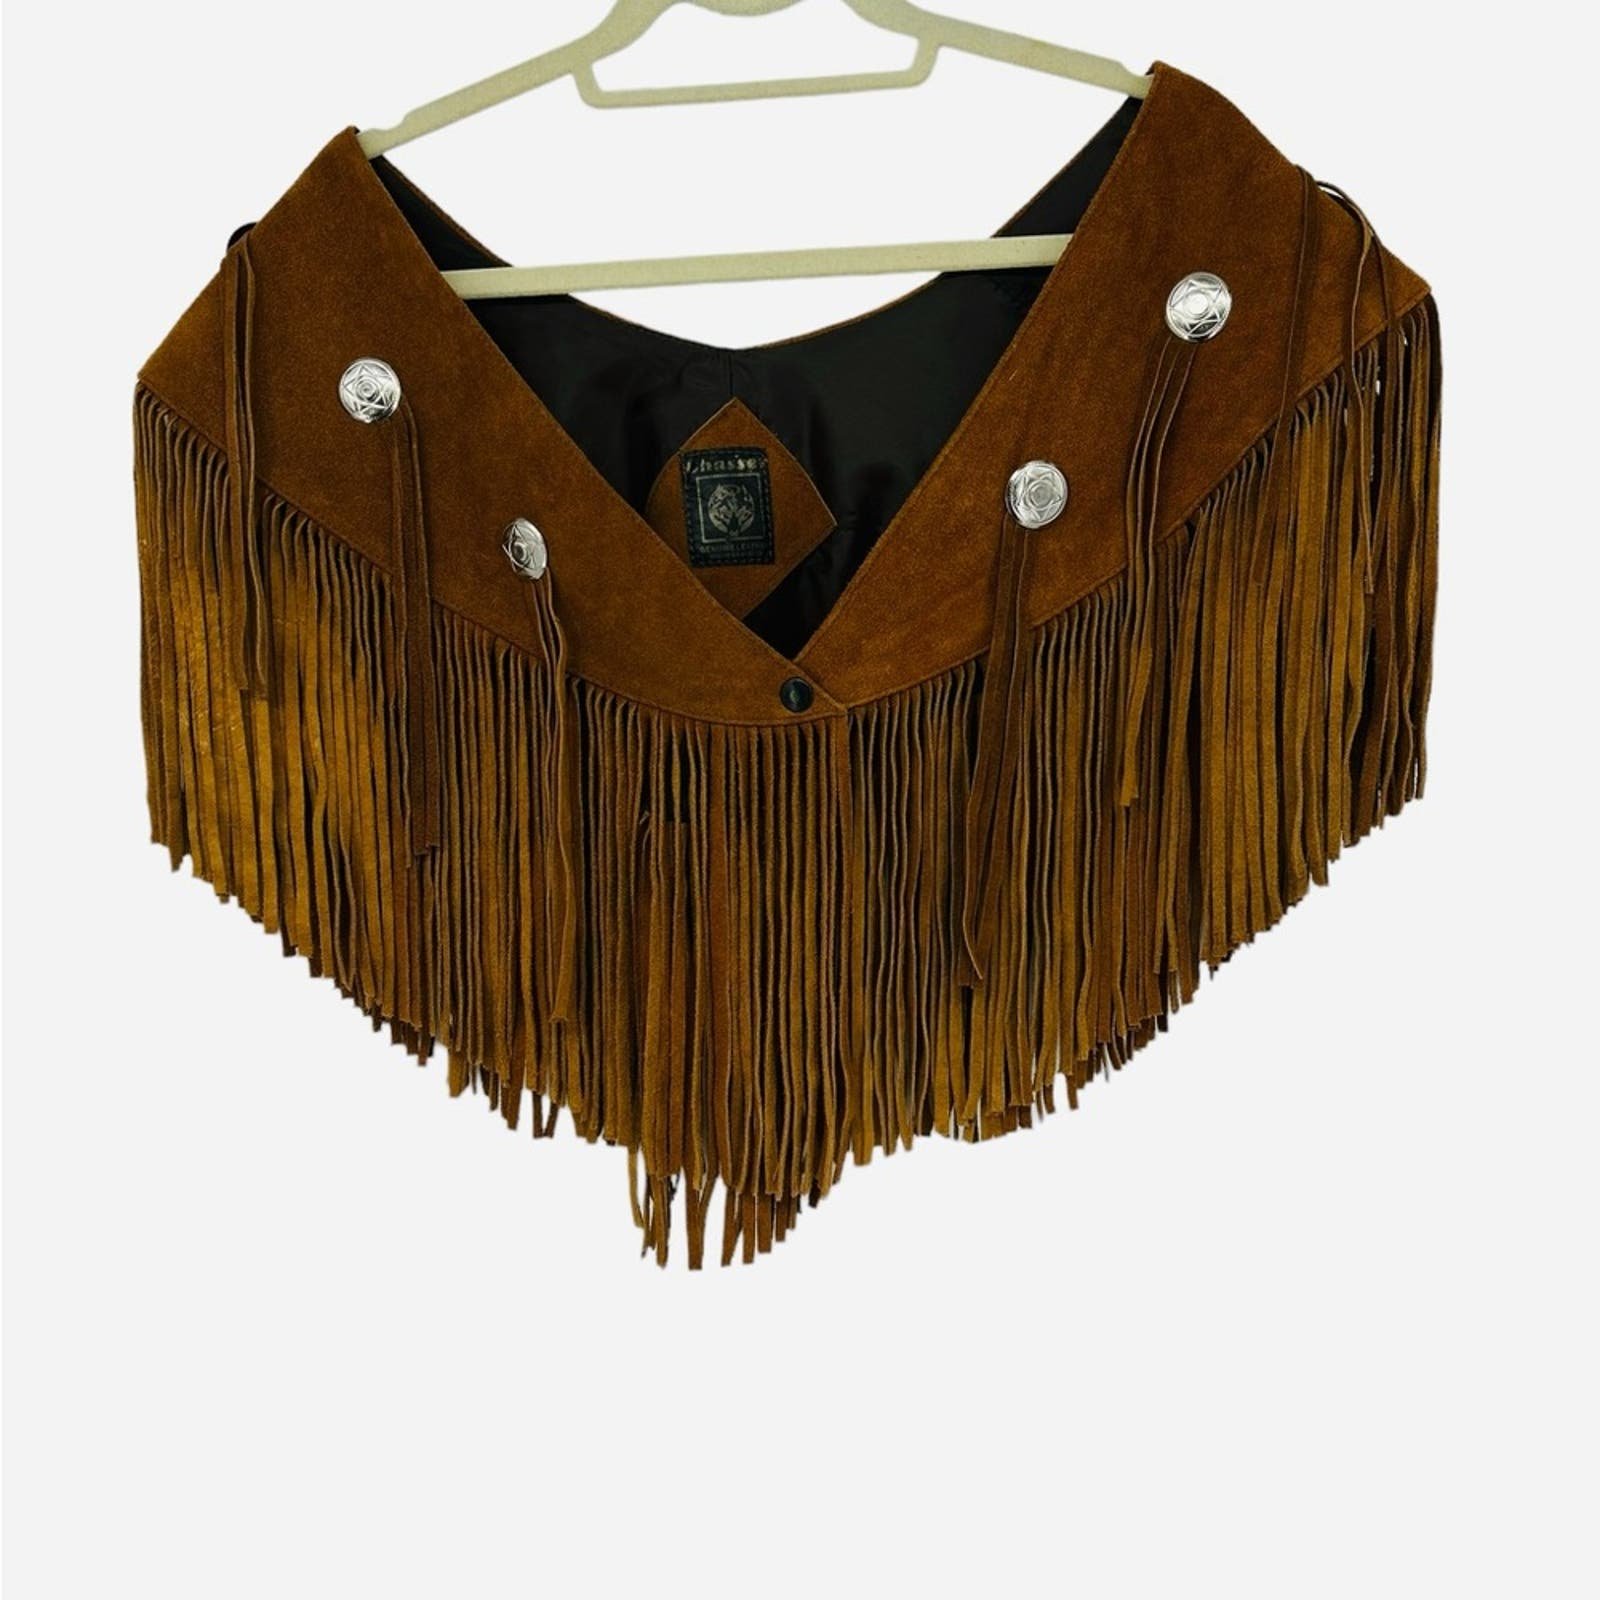 Perfect Vintage Chasser hippie western suede fringe poncho shawl cape made in Mexico guFEkGCpJ High Quaity